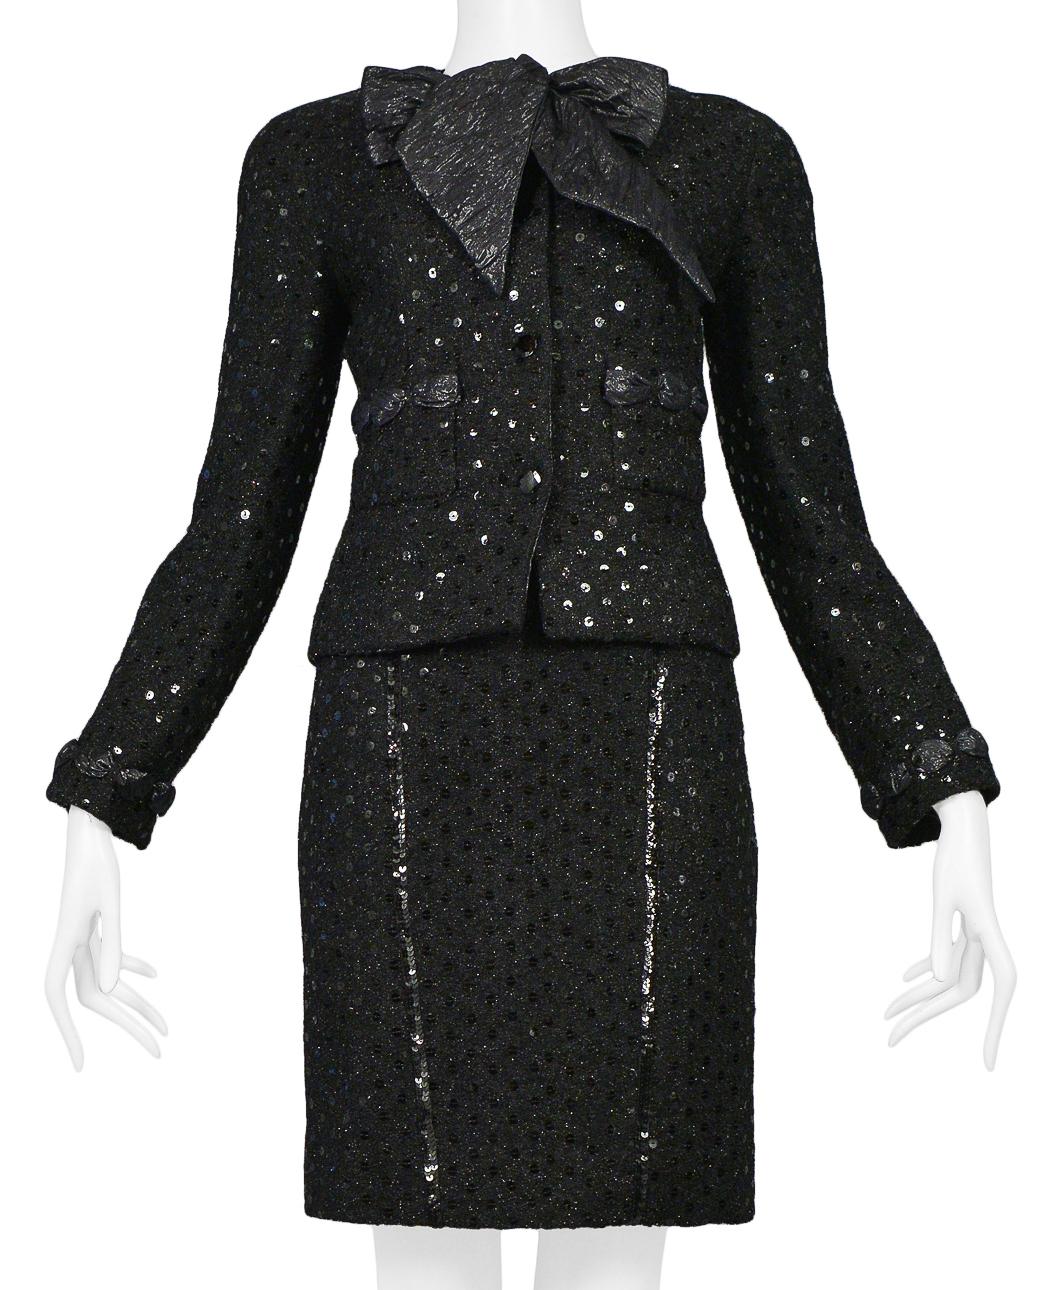 Vintage Chanel black boucle skirt suit ensemble. Jacket is embellished with sequins and woven taffeta ribbon detail. Quilted black taffeta crossback tank is paired with high waisted boucle skirt w/ black sequin detail throughout. This ensemble is a